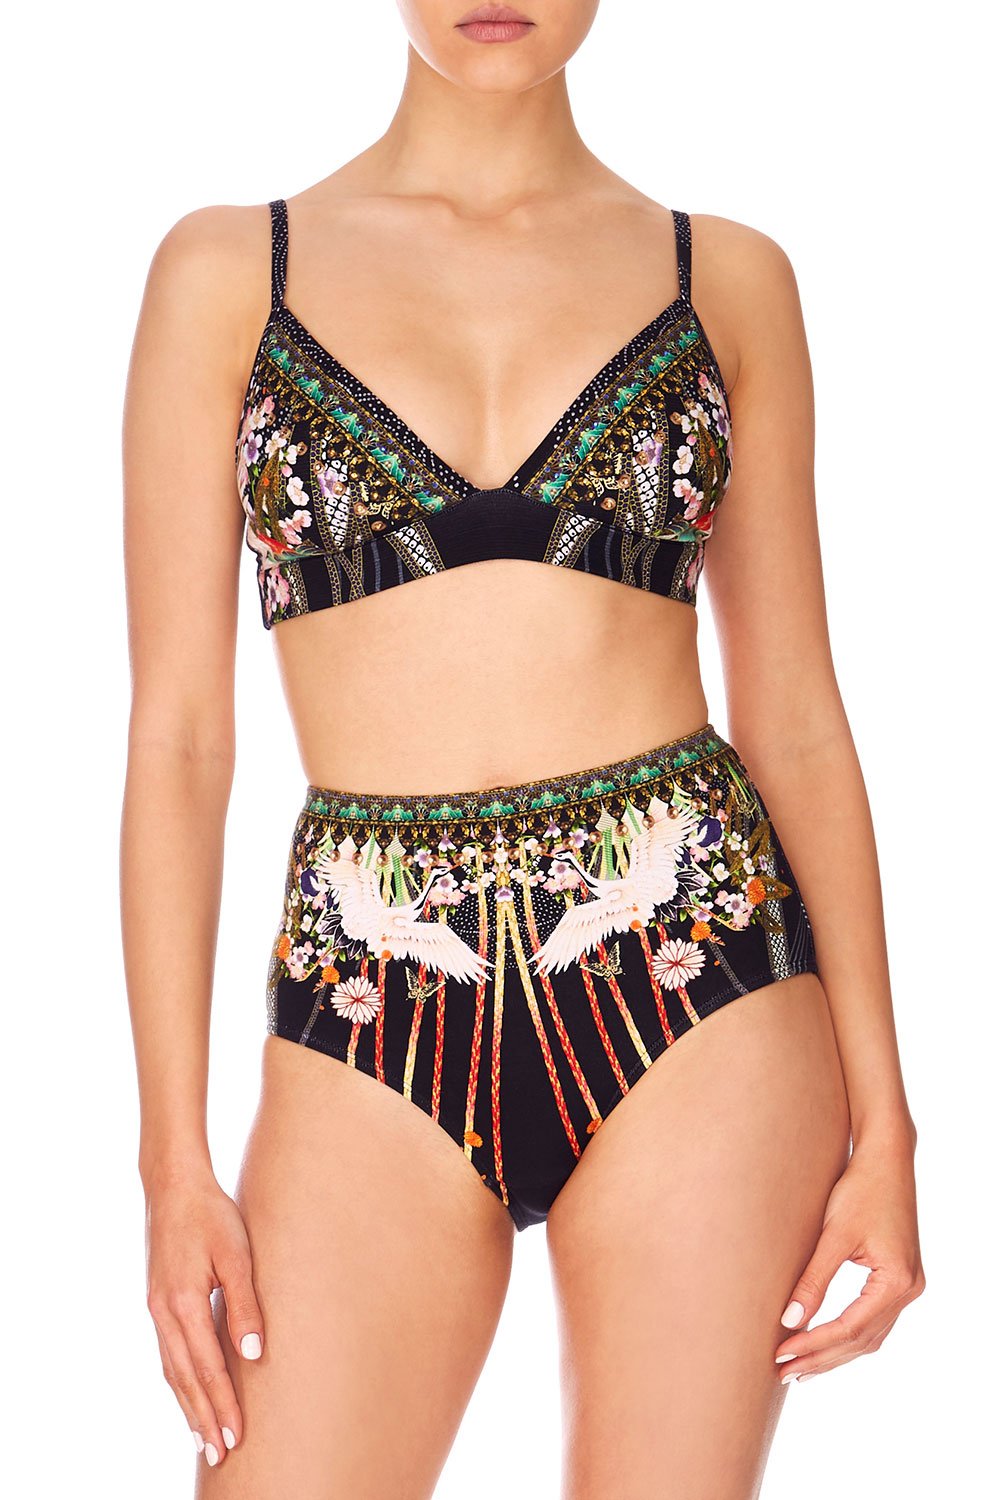 Revealing the mystical threads of her deepest history, the Queen Of Kings Soft Bra with Back Clip references Japan's exotic floral bouquets with an opulent crystal-studded design. Crafted from the softest lightweight fabric, this luxurious printed lingeri